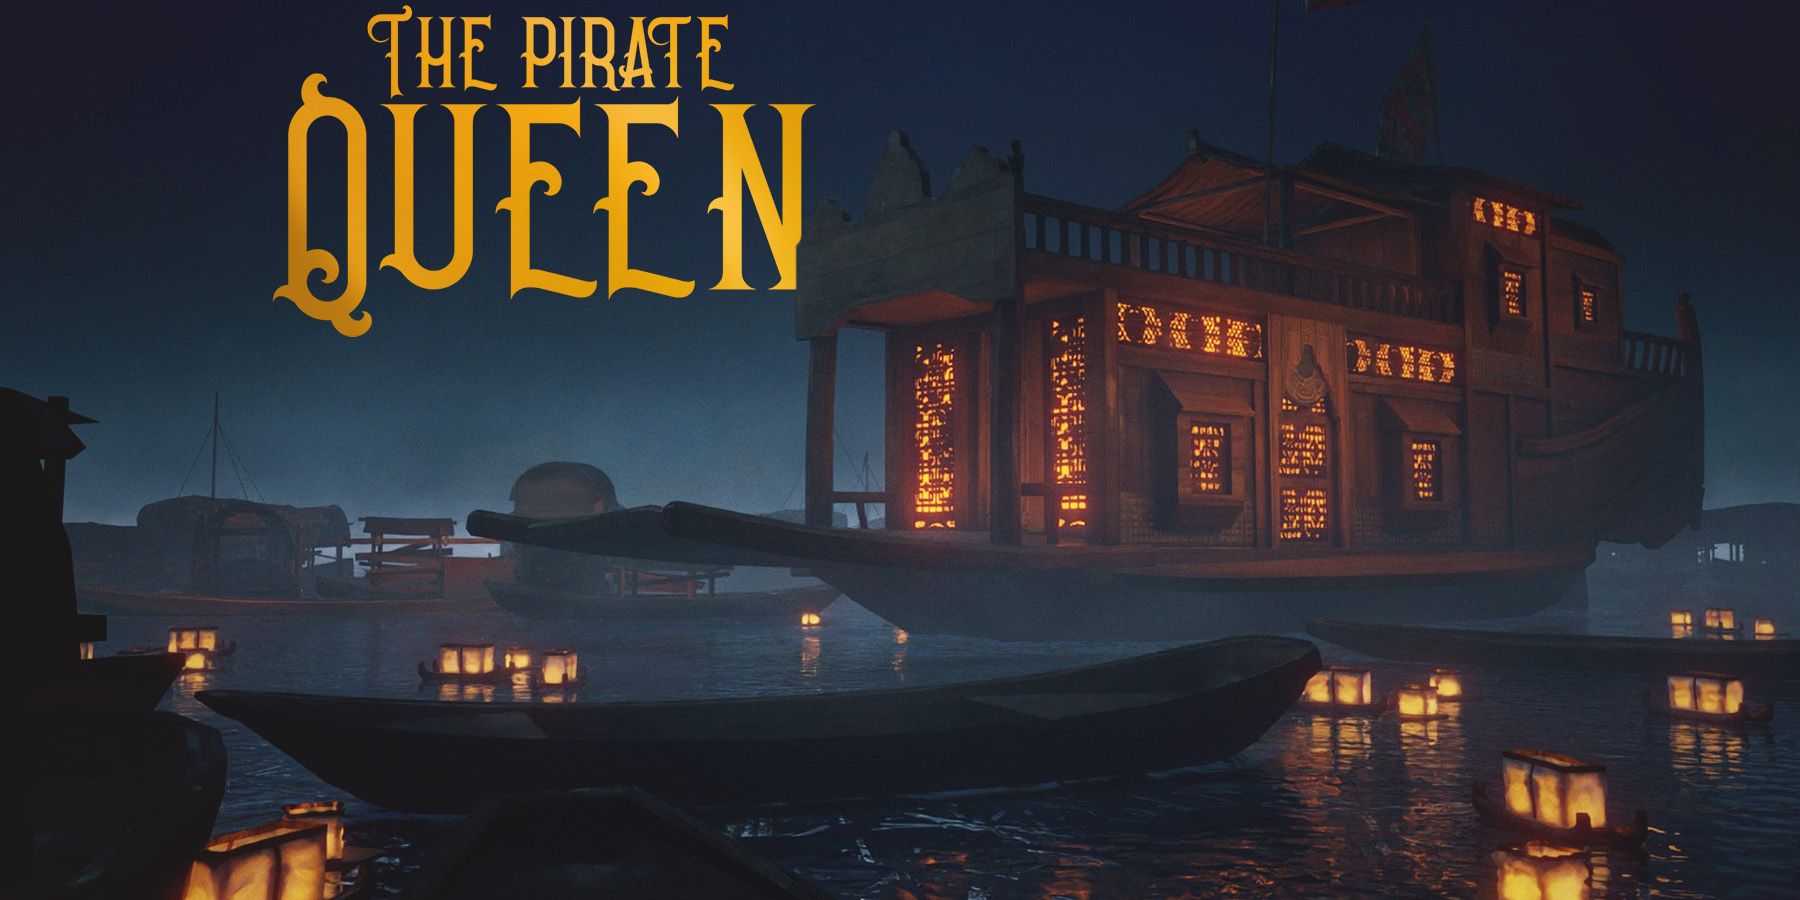 The Pirate Queen A Forgotten Legend boats promo artwork with yellow game logo edit